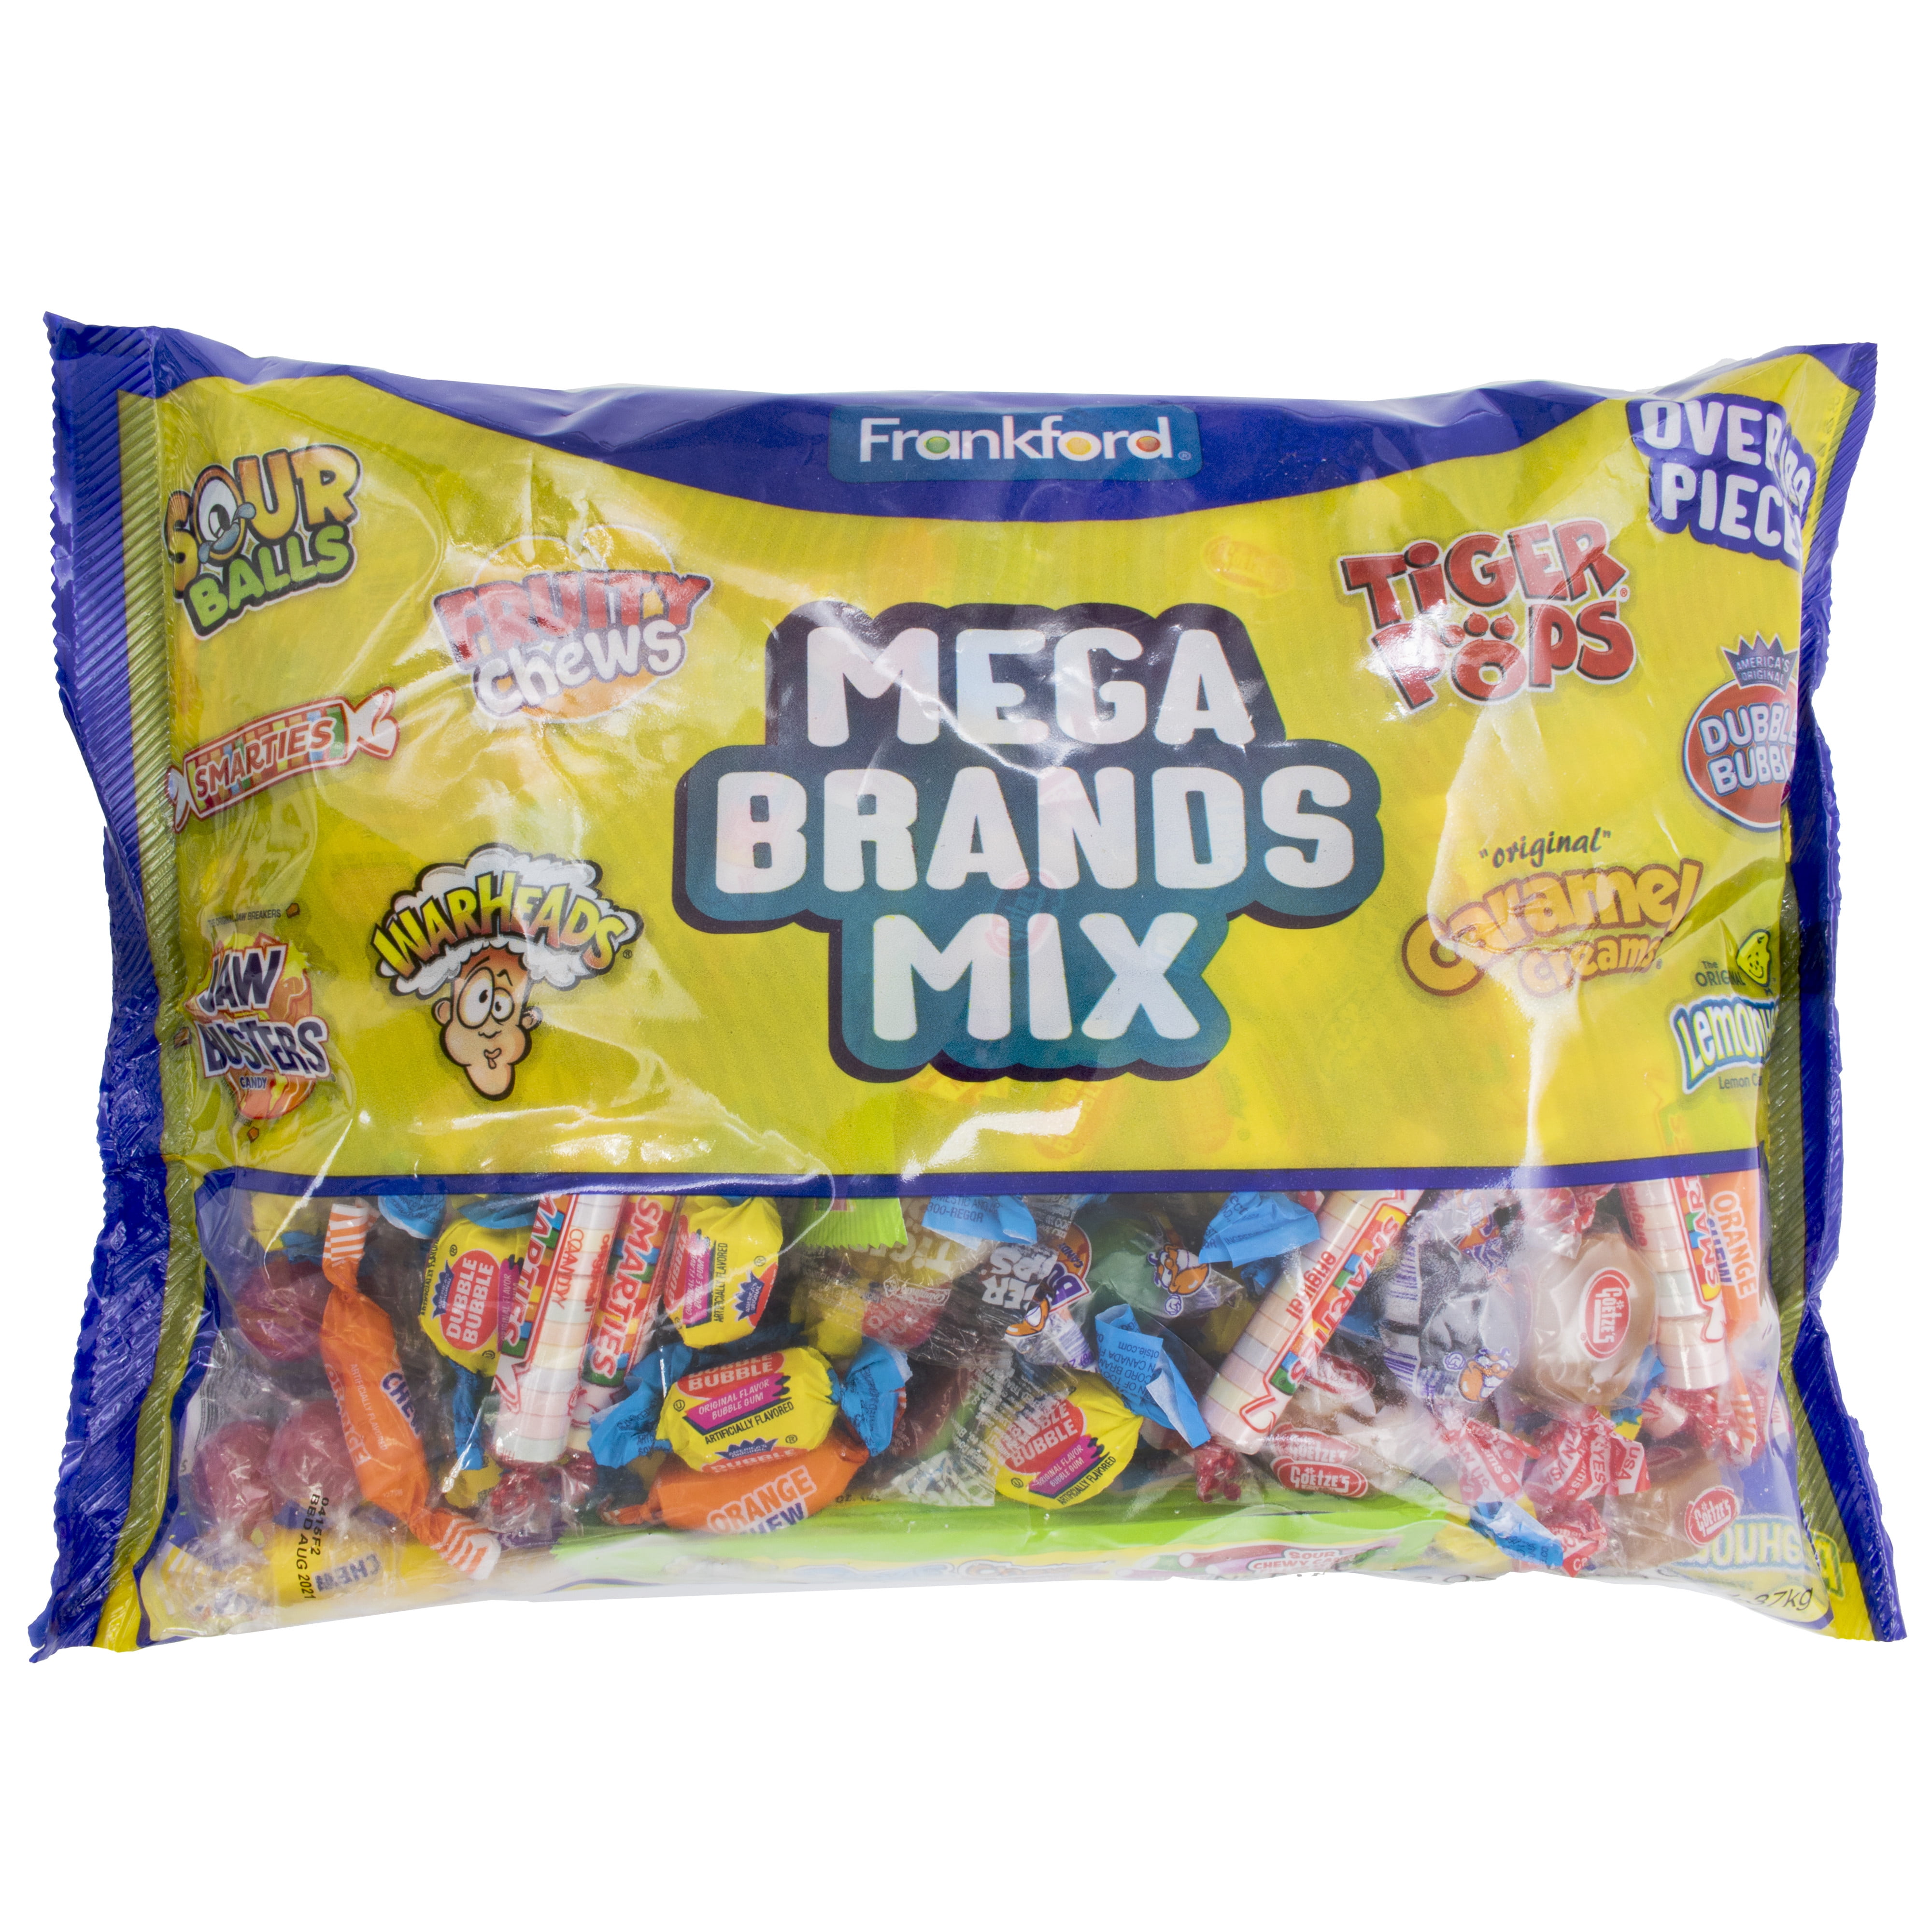 Frankford Mega Brand Mix Candy and Gum 48.2 oz